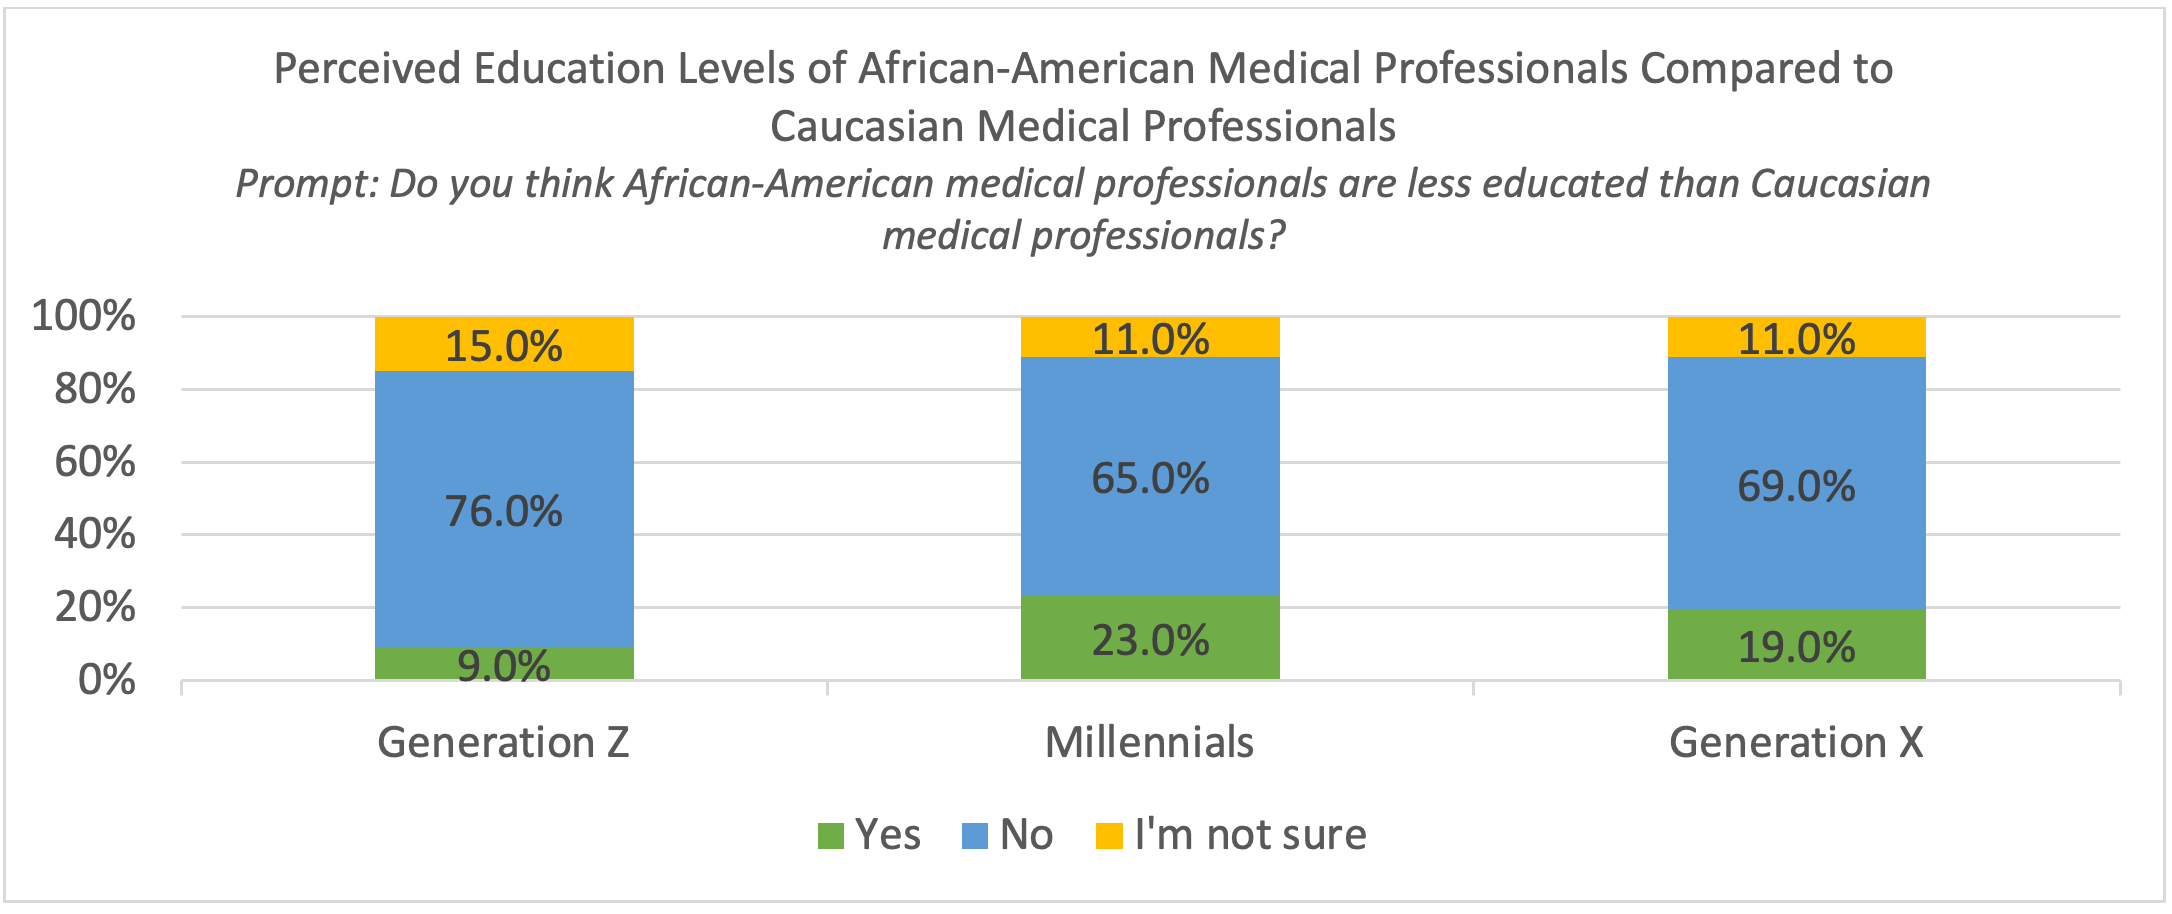 Table 7. Perceived Education Levels of African American Medical Professionals Compared to Caucasian Medical Professionals